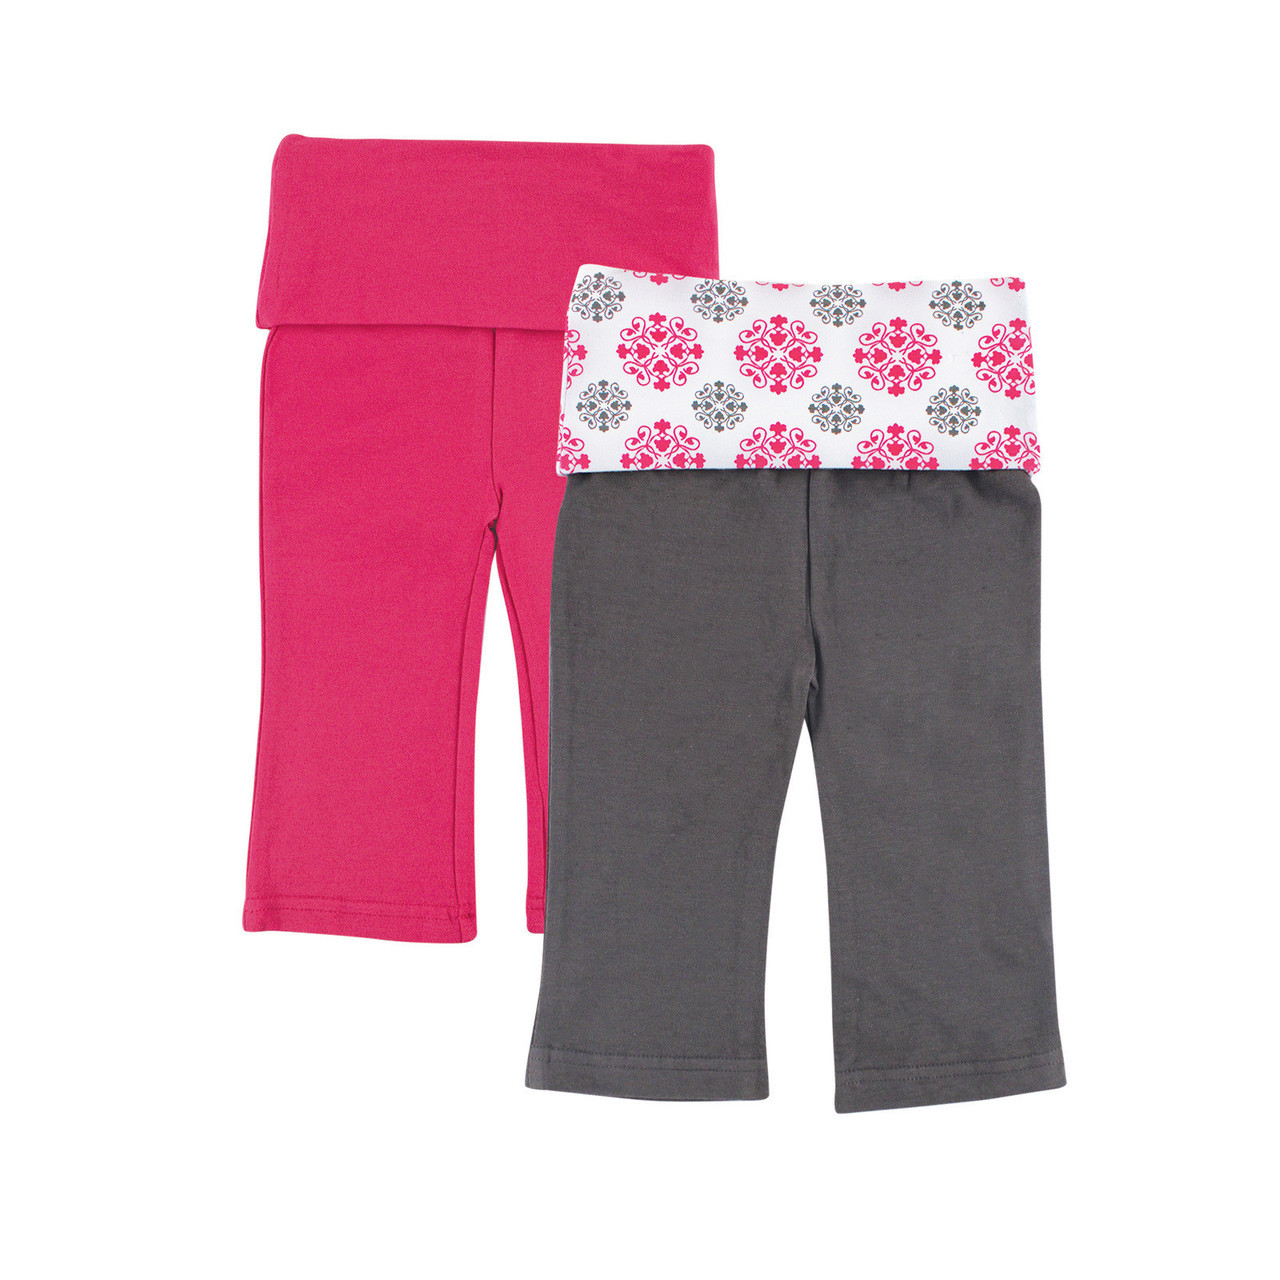 Yoga Sprout Yoga Pants, 2-Pack, Pink Medallion  Baby and Toddler Clothes,  Accessories and Essentials